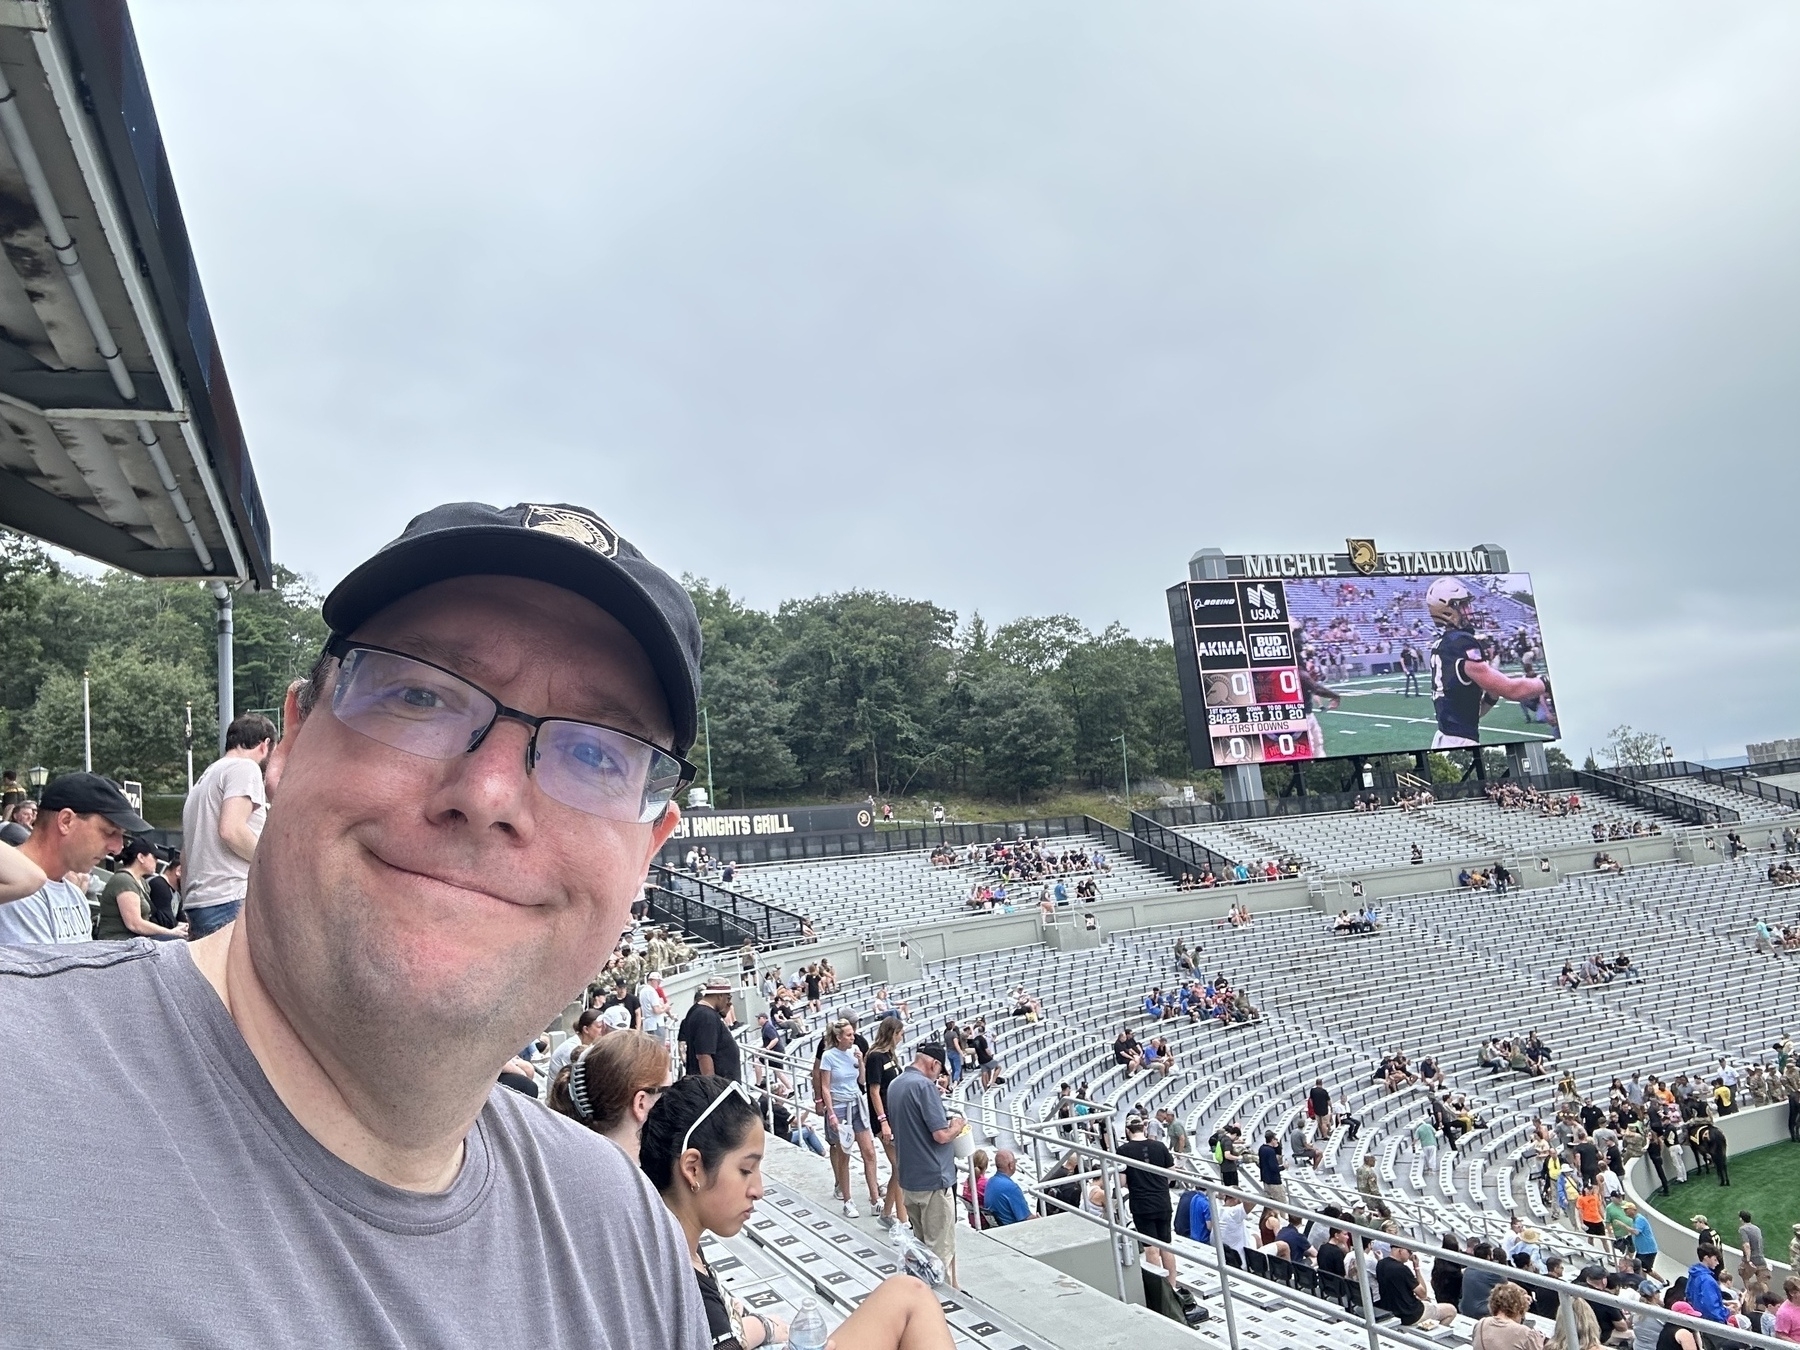 Selfie of the author at Michie Stadium at the United States Military Academy.